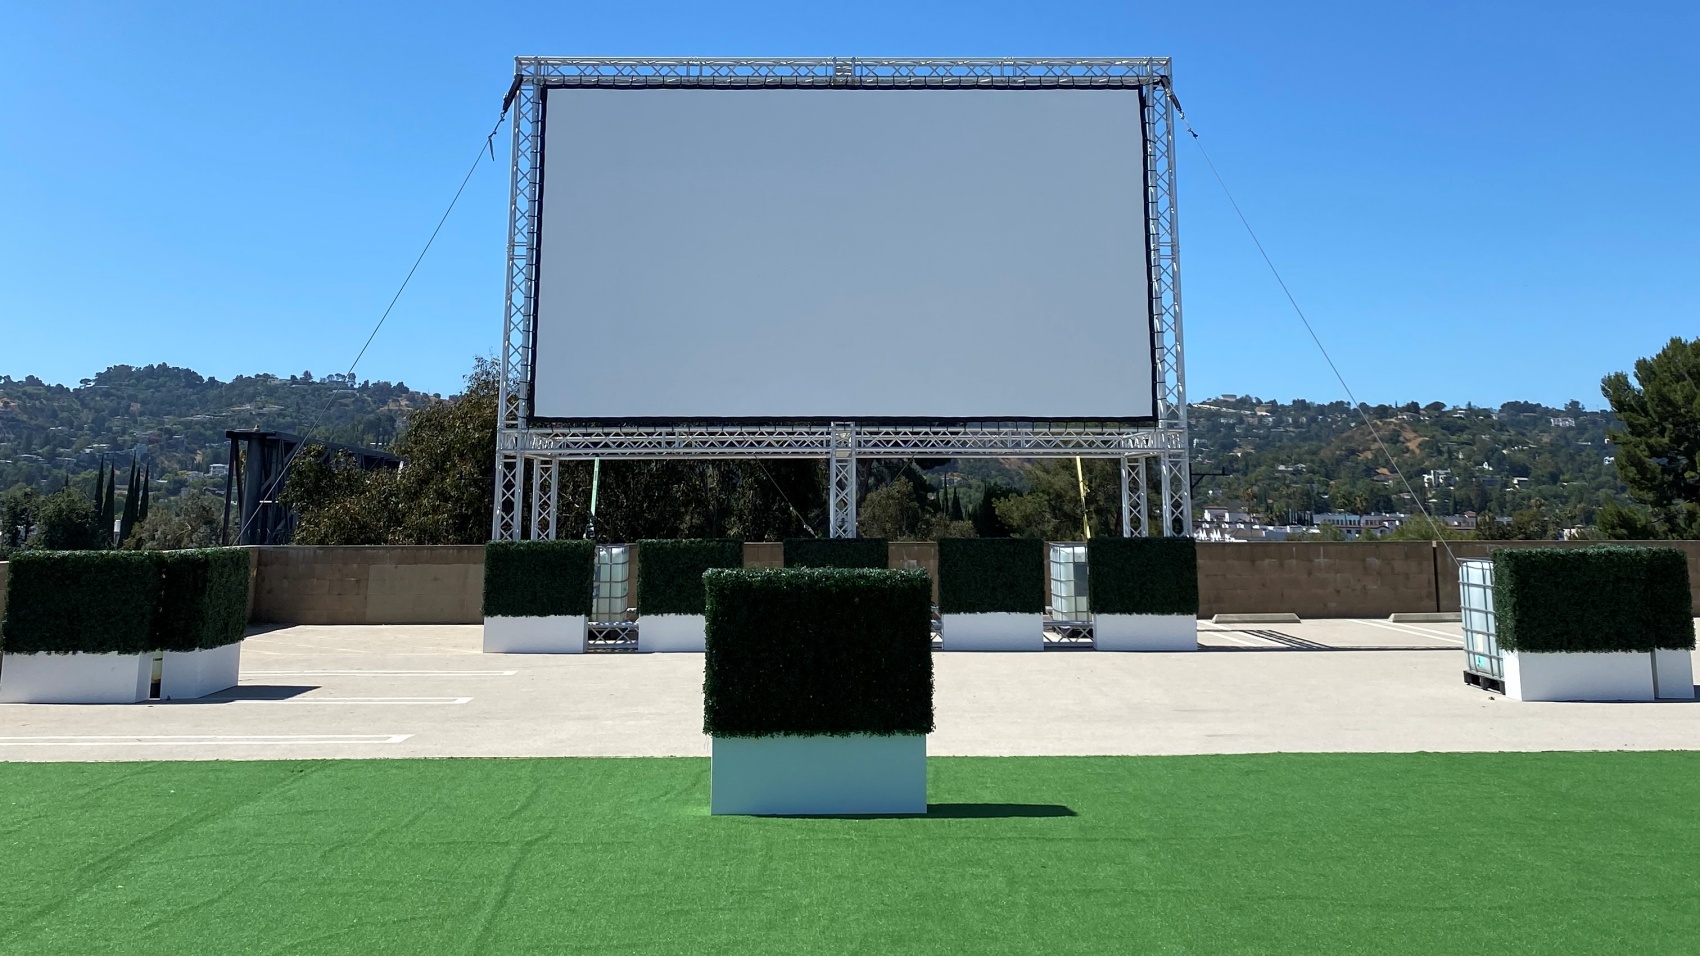 Mall-tastic Watch Movies on the Roof in Sherman Oaks